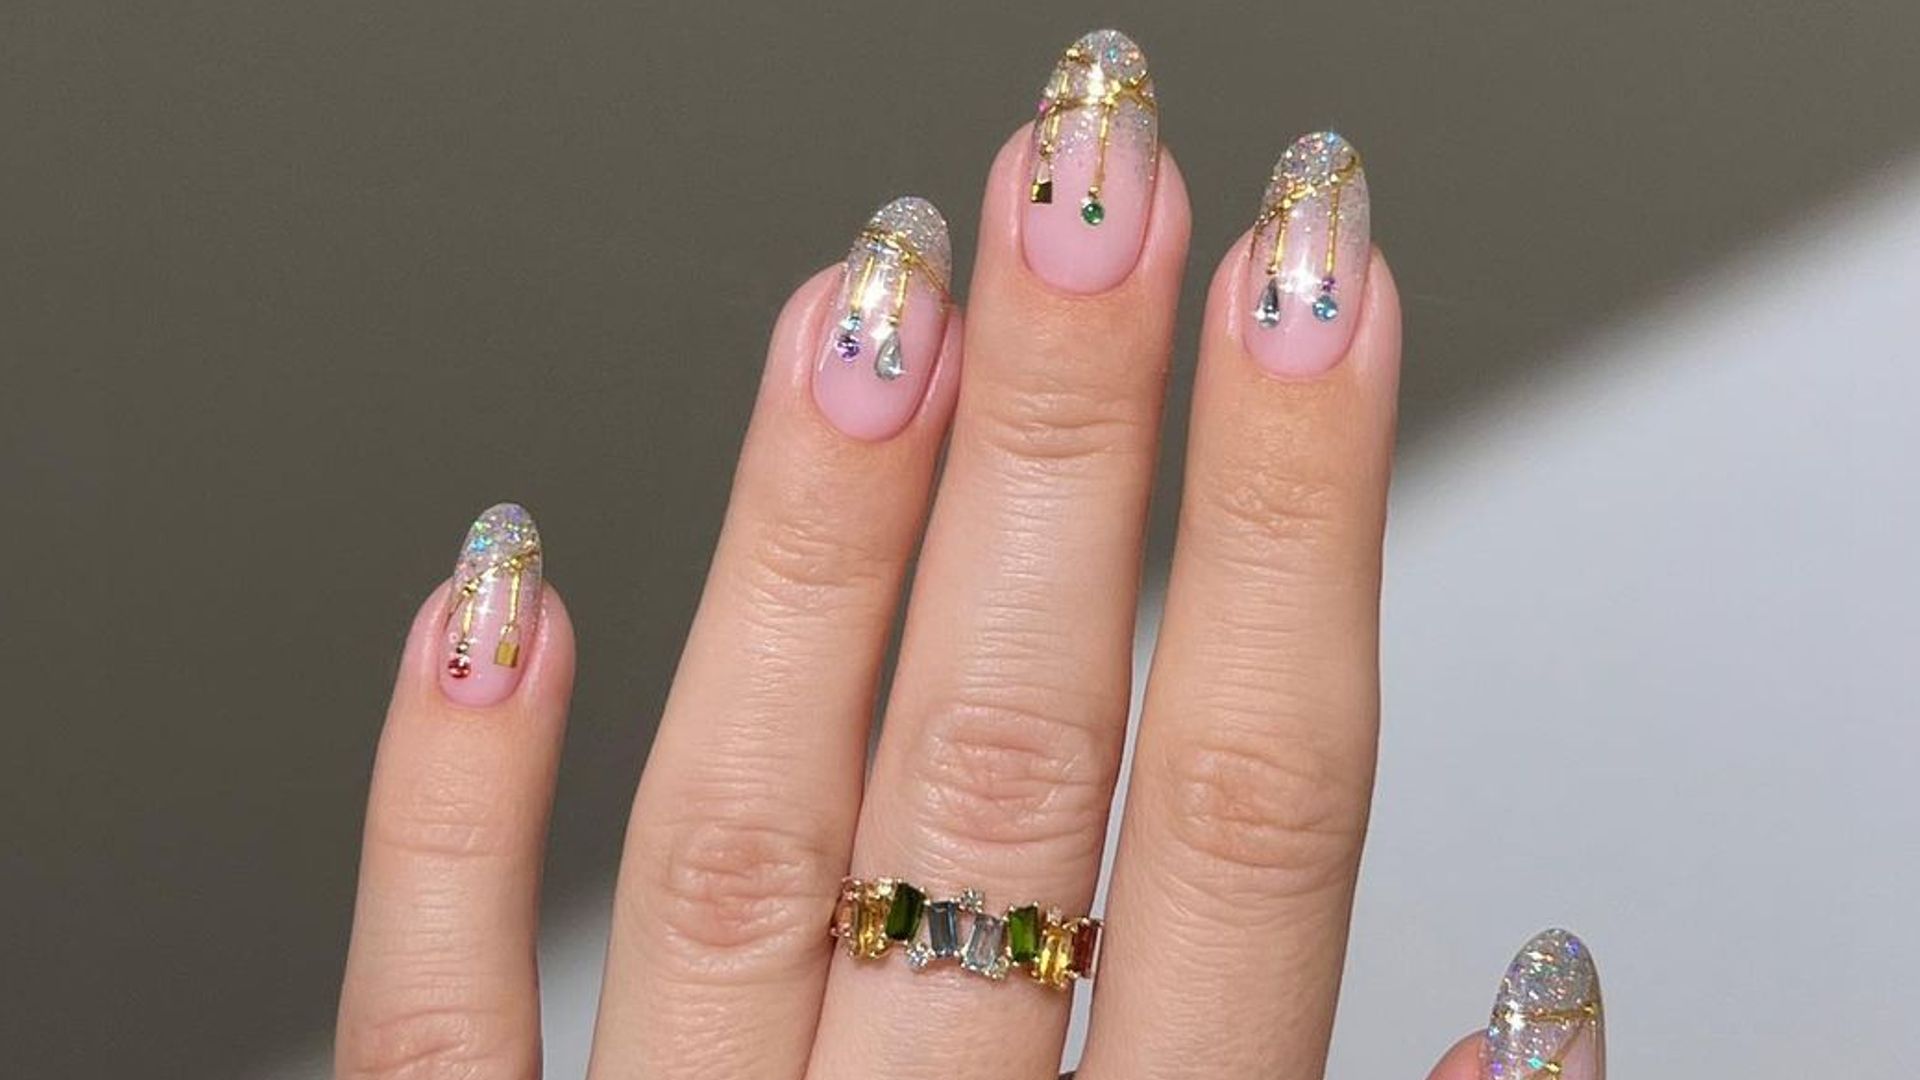 Nails with jewel gems 